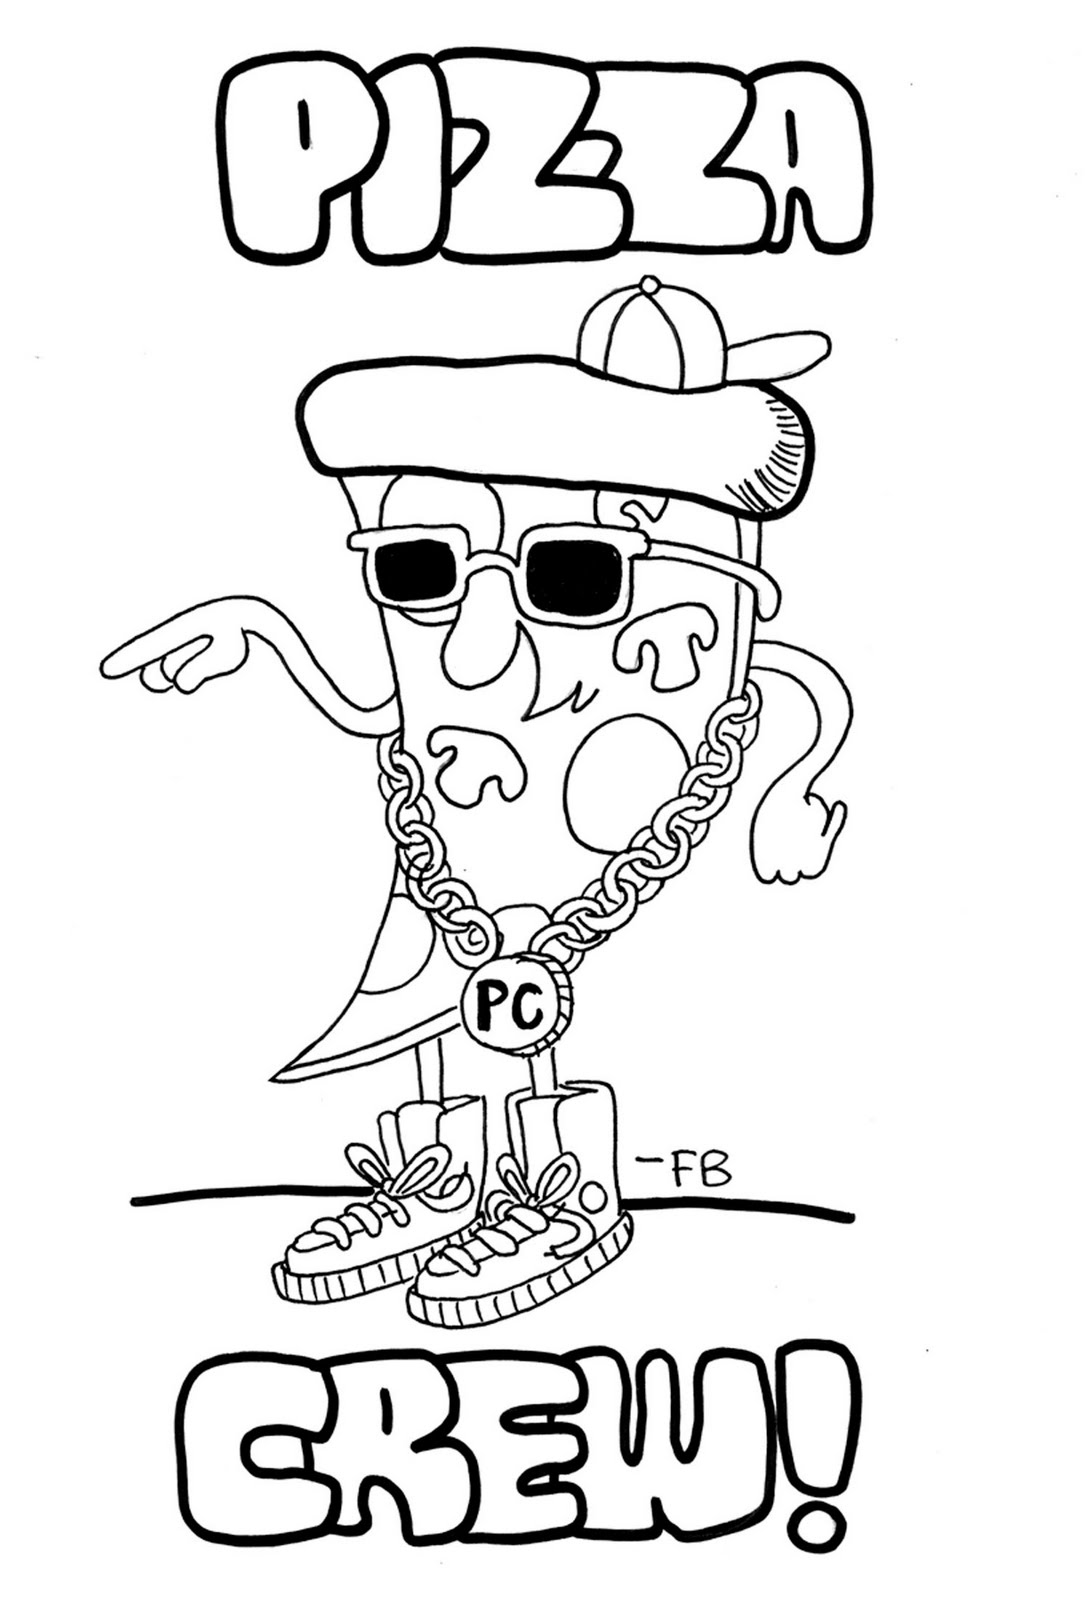  Pizza coloring pages | kids printable coloring pages | #9